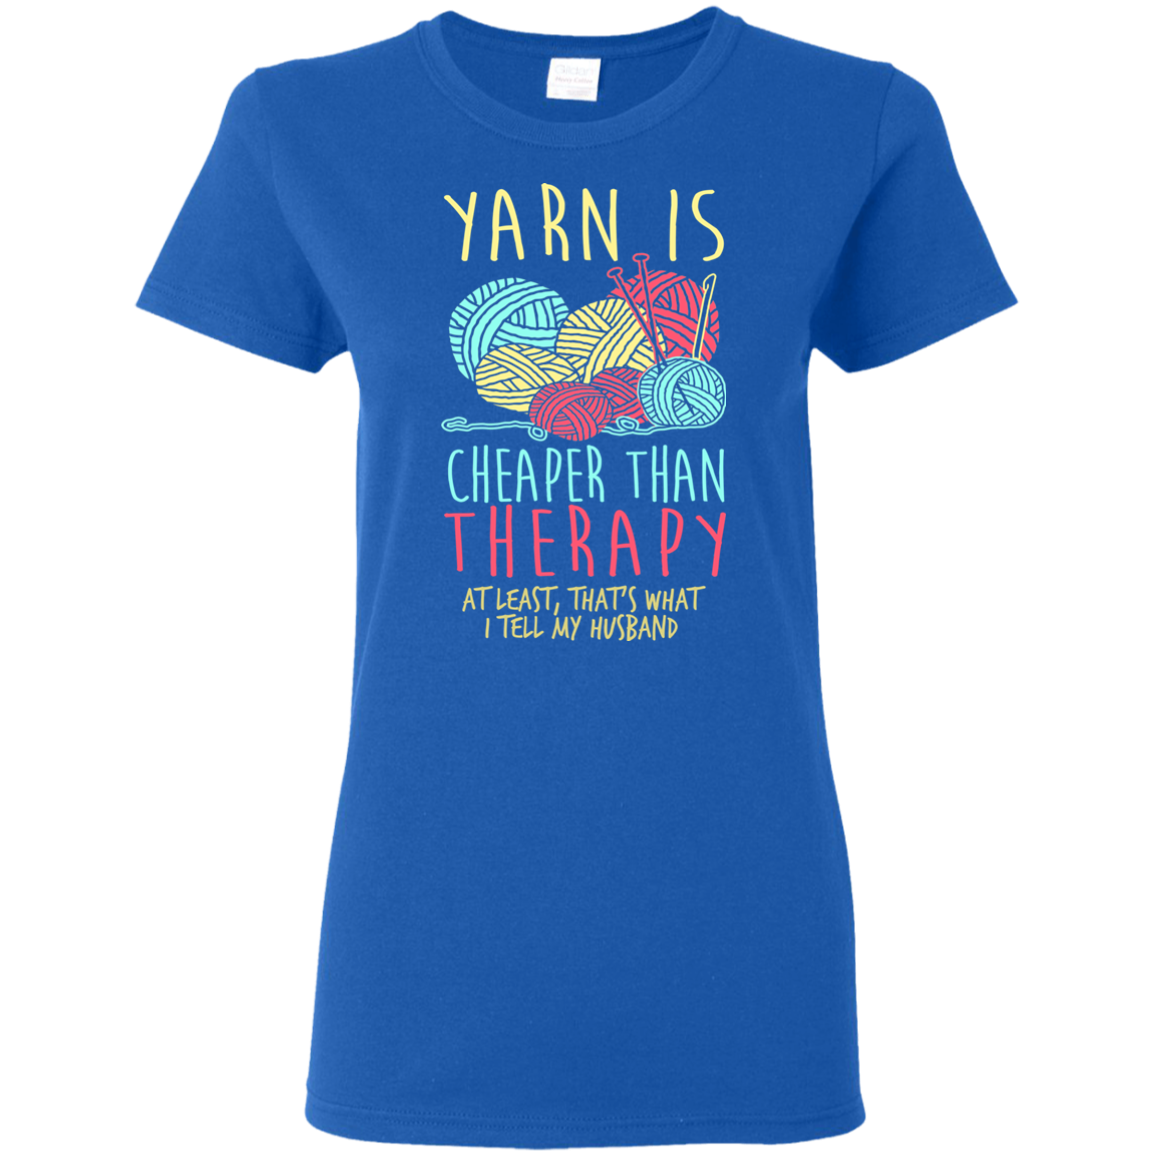 Yarn is Cheaper than Therapy Ladies' T-Shirt